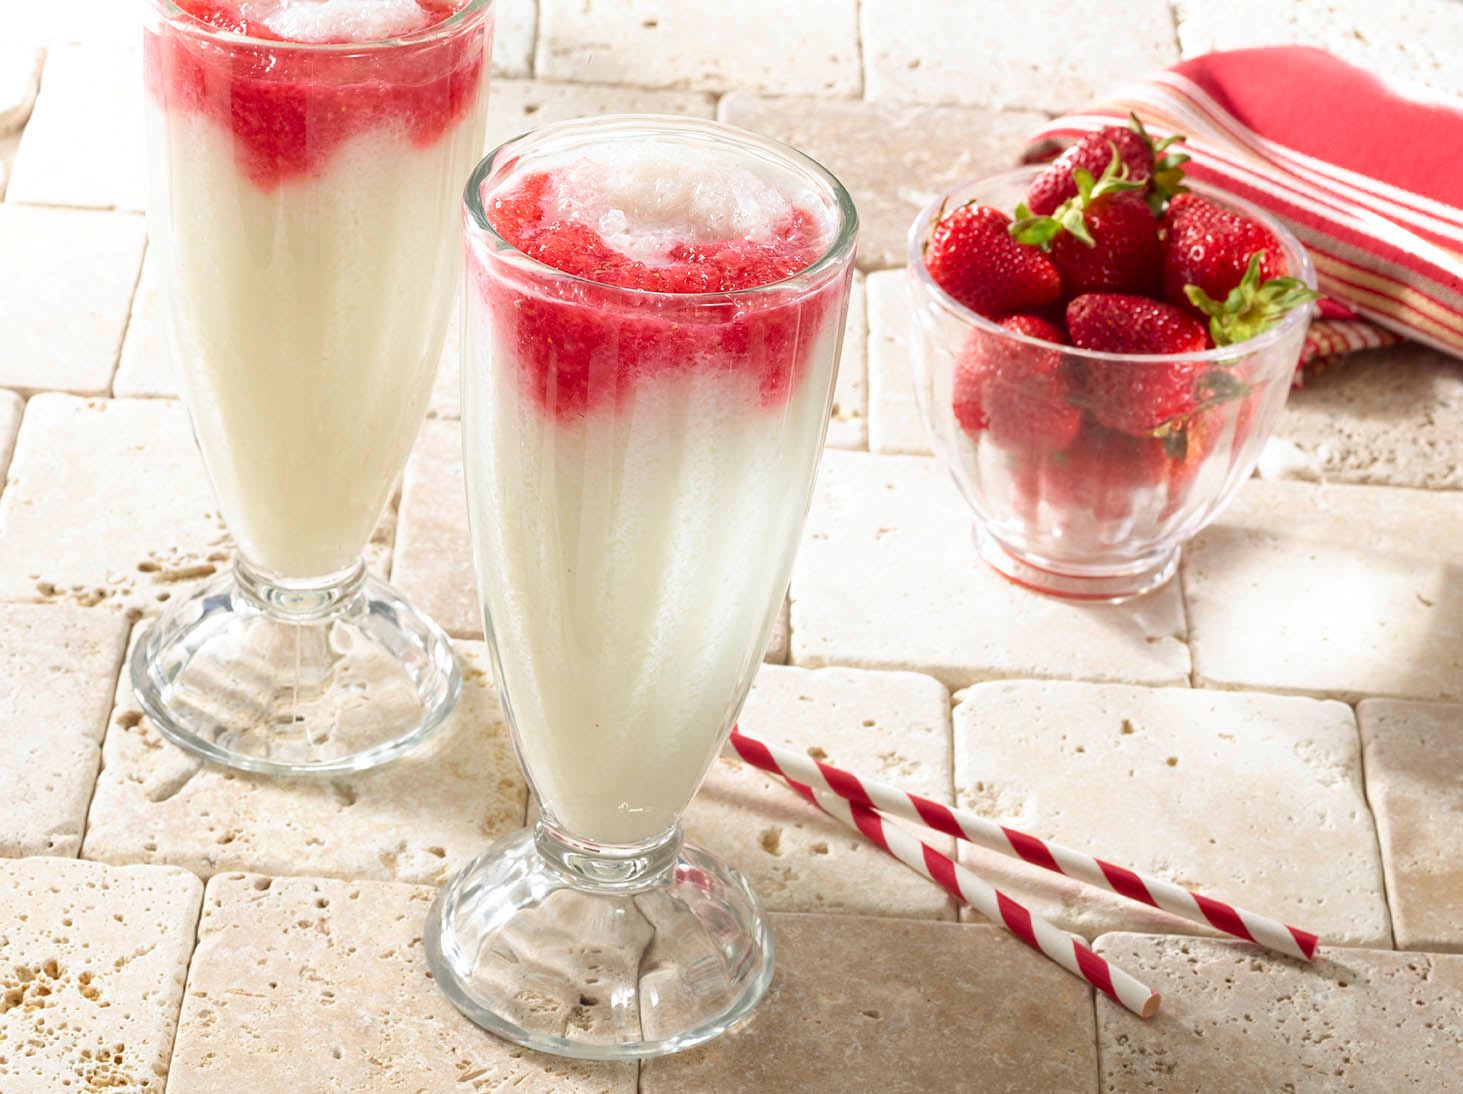 Red and White Soursop Shakes